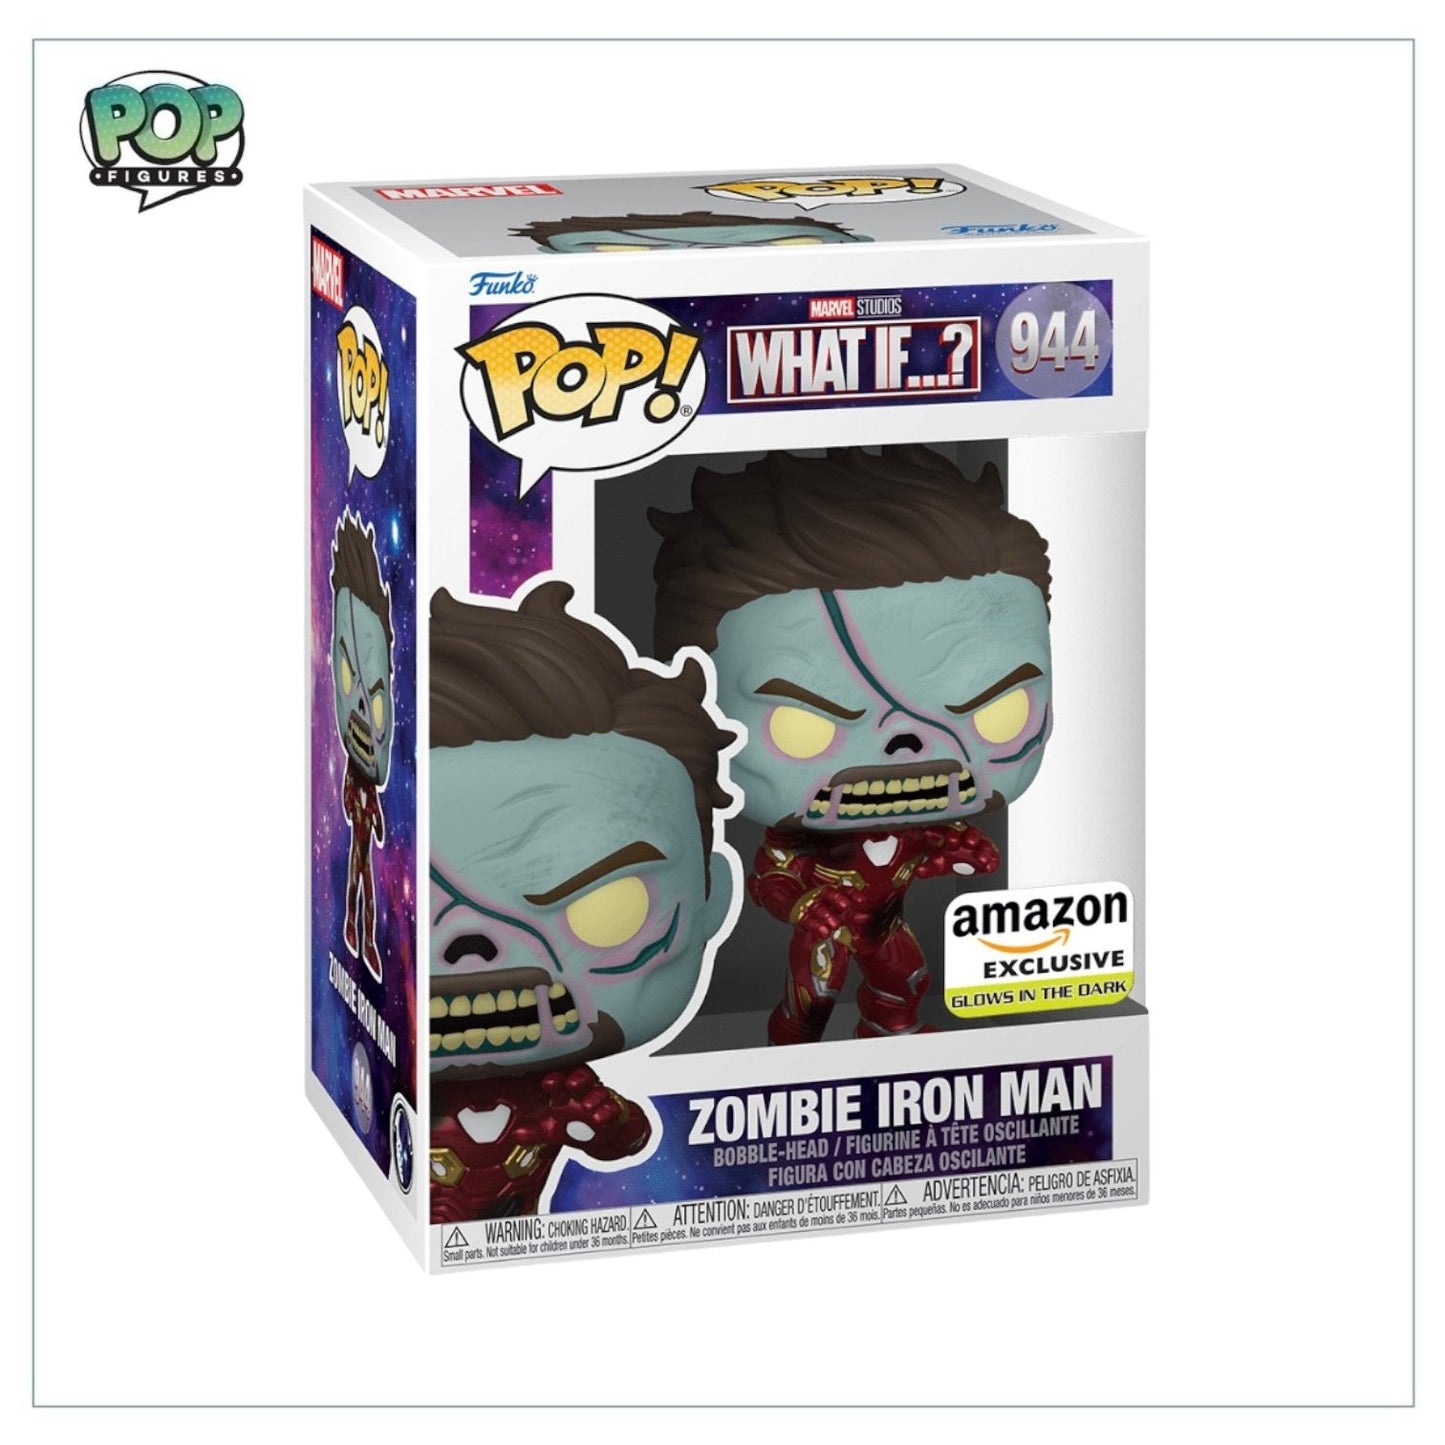 Zombie Iron Man (Glows in the Dark) #944 Funko Pop! - Marvel What If…? - Amazon Exclusive - Angry Cat